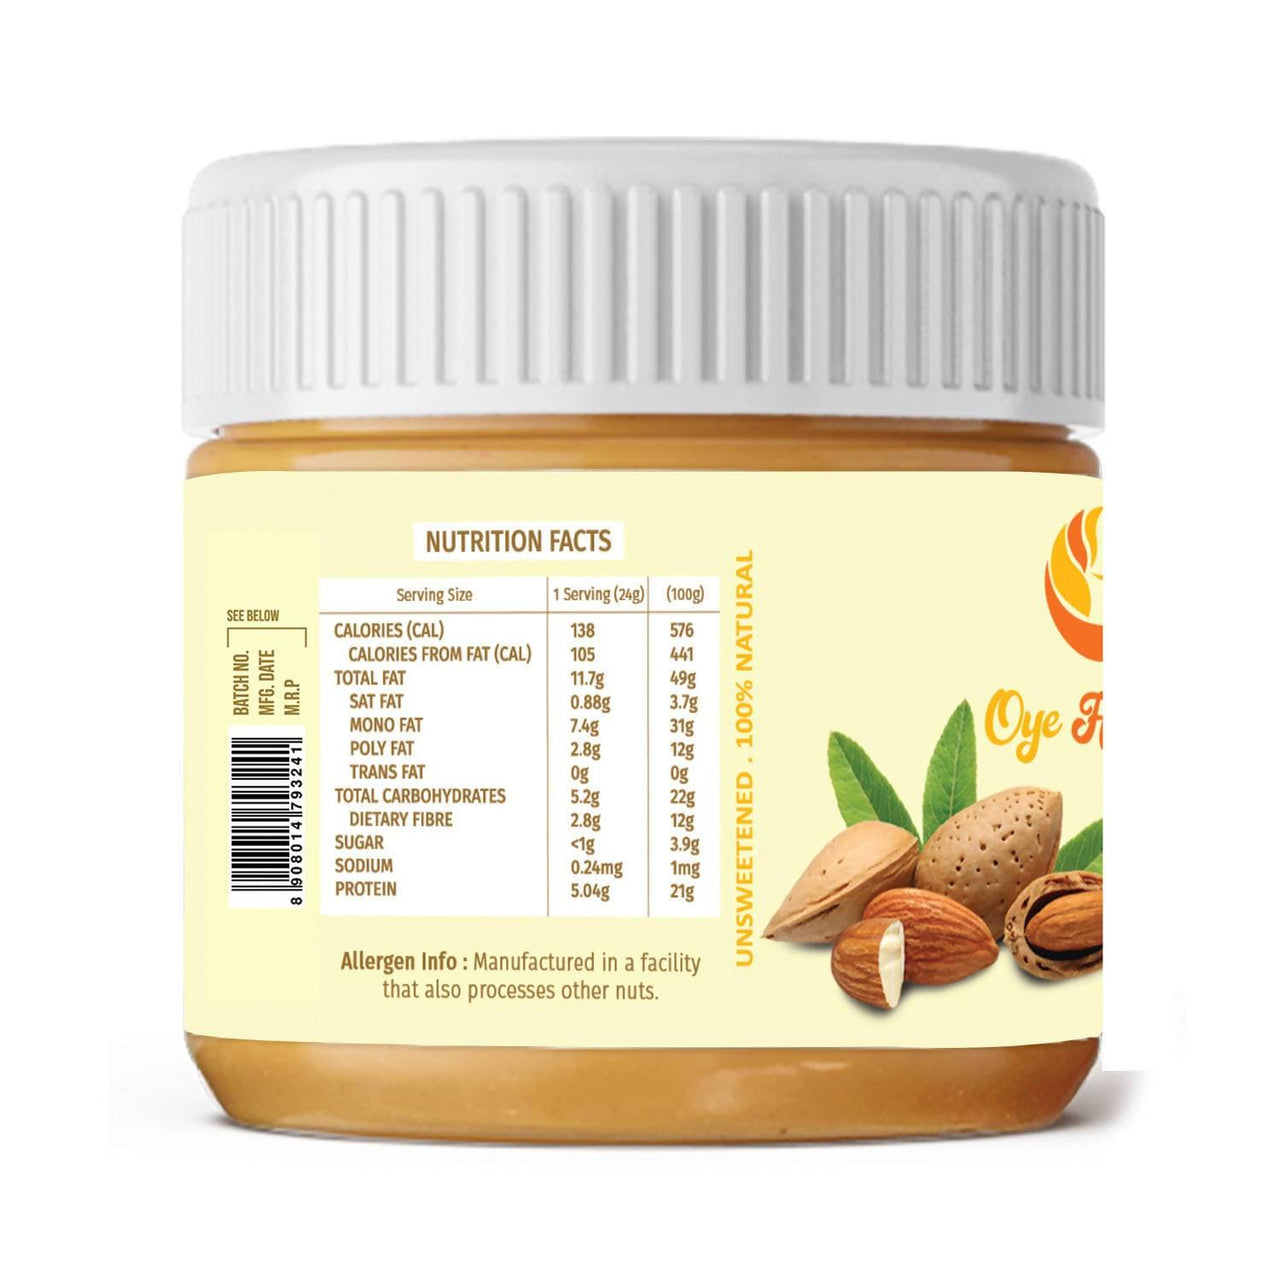 Oye Healthy Almond Butter Natural Creamy